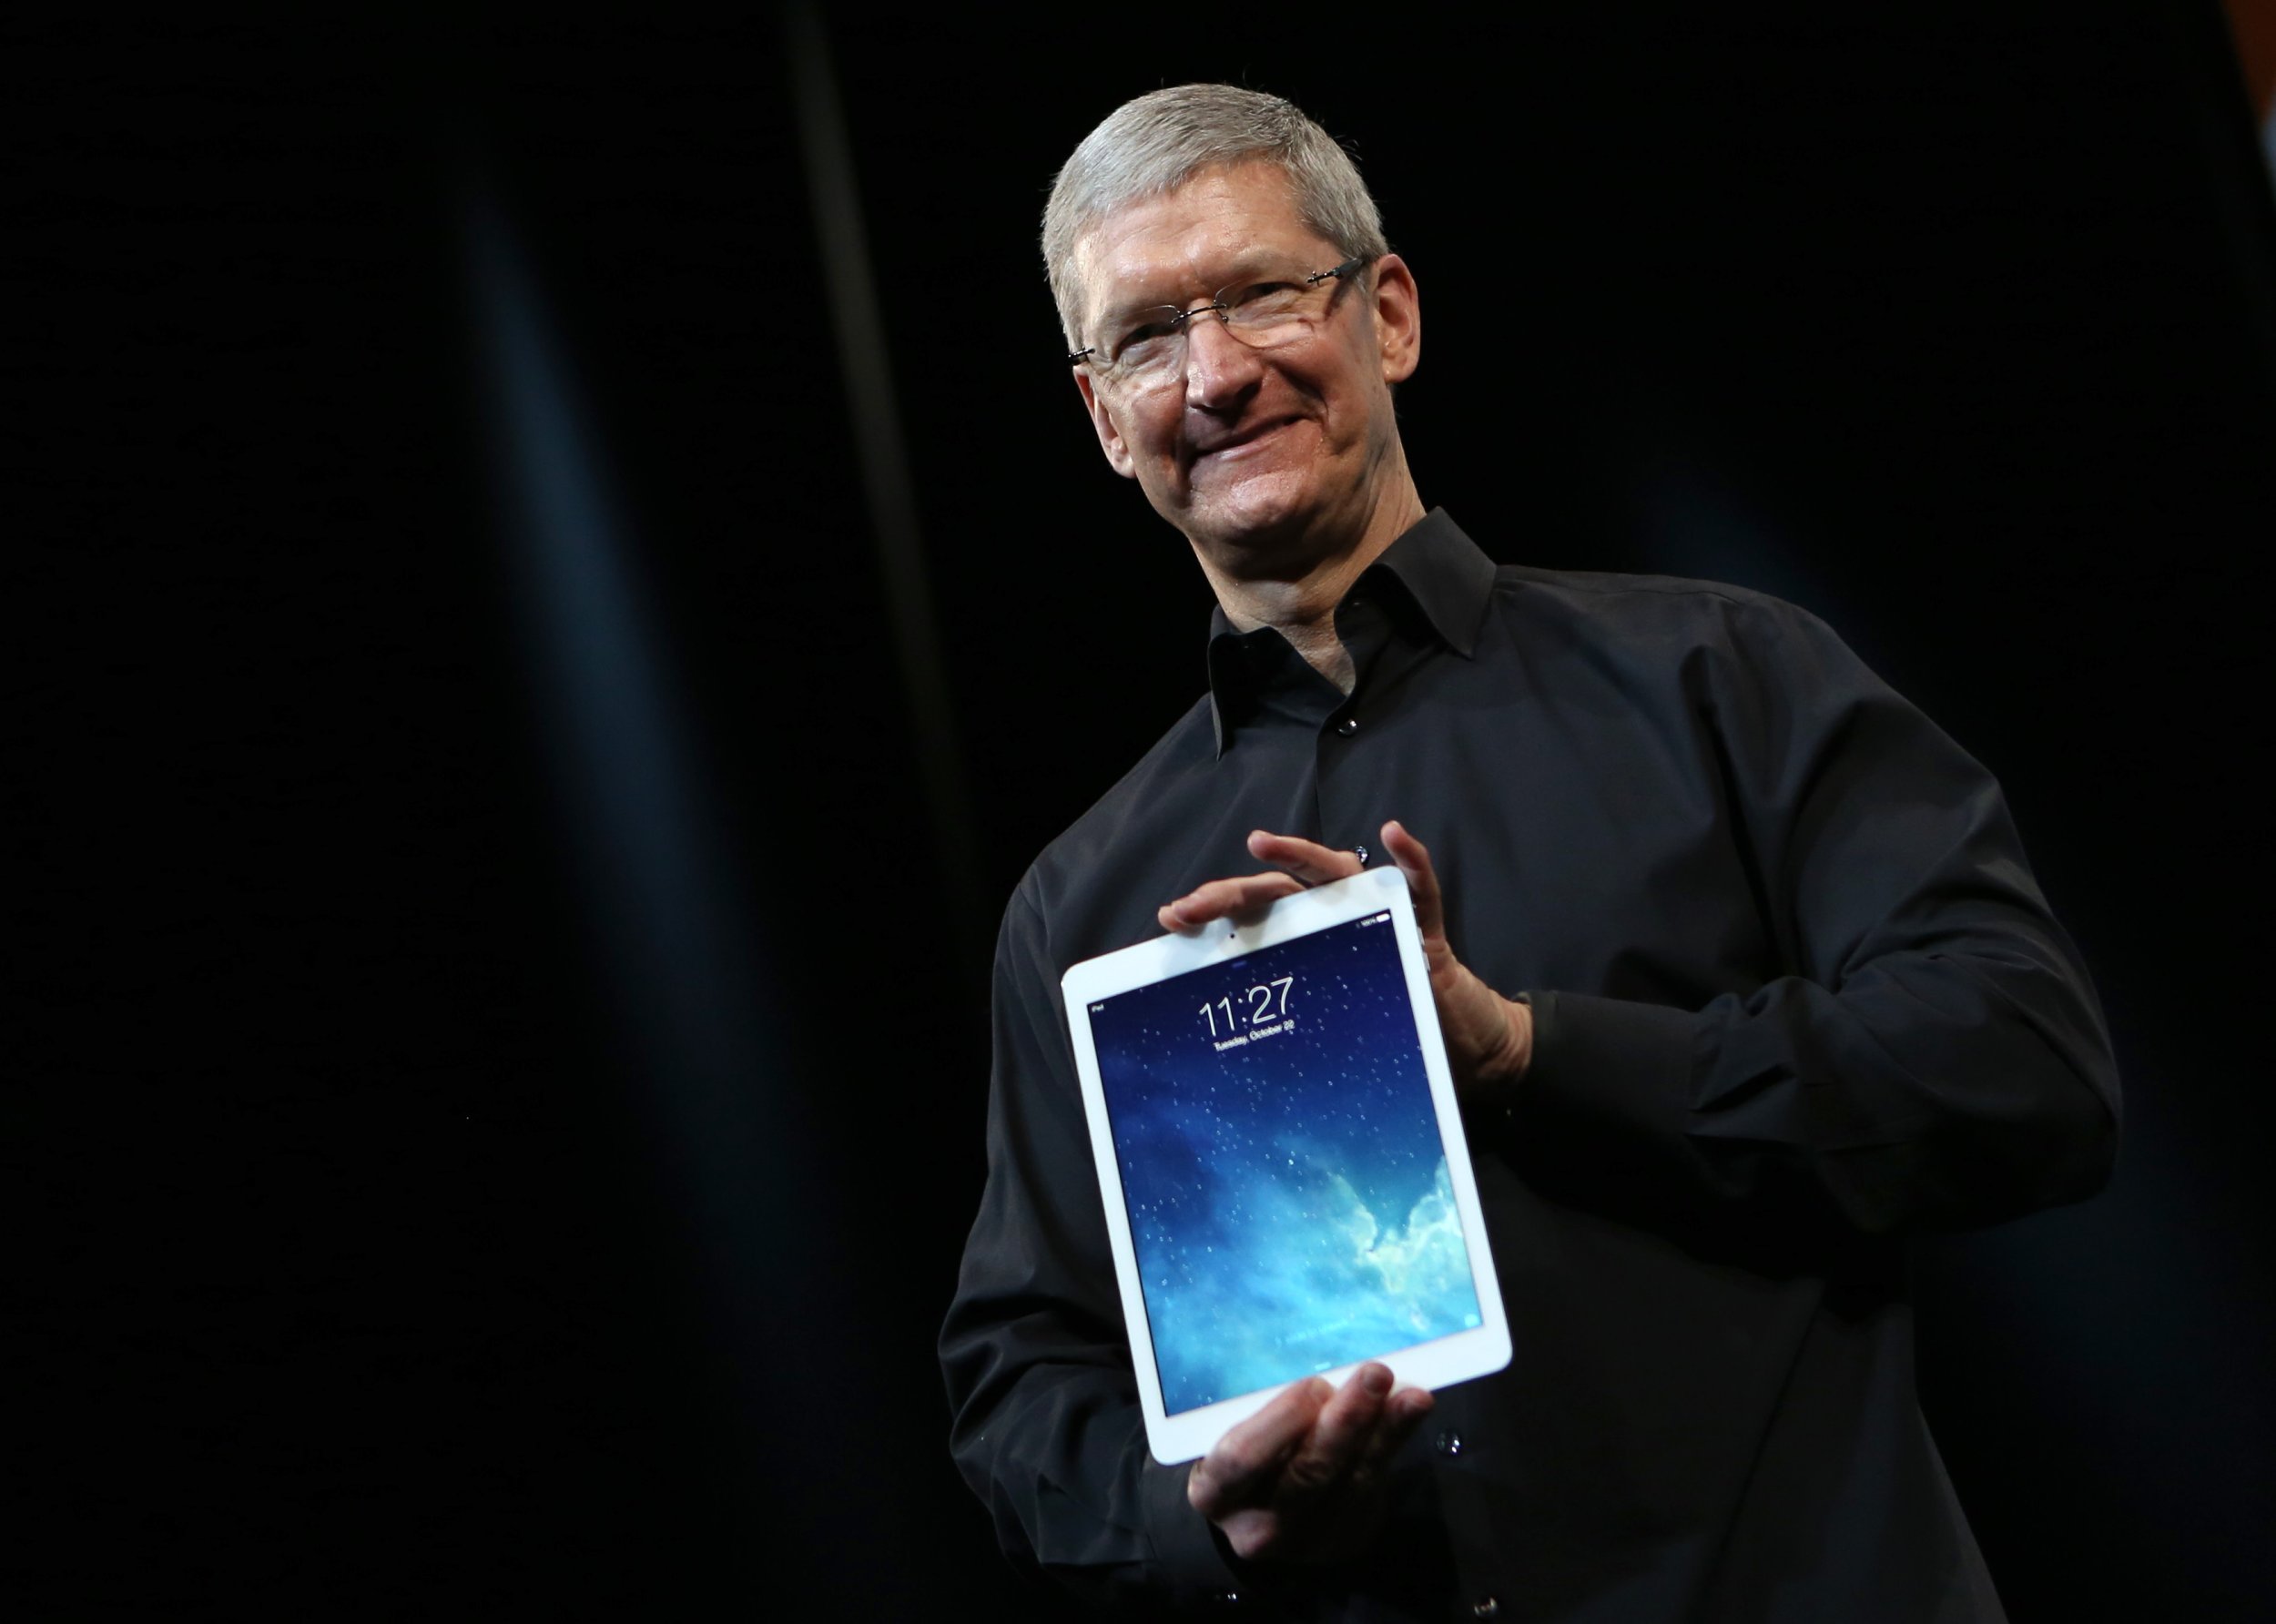 Apple iPad 6, iPhone 6 Release Date Rumors 12.9Inch iPad Tipped For